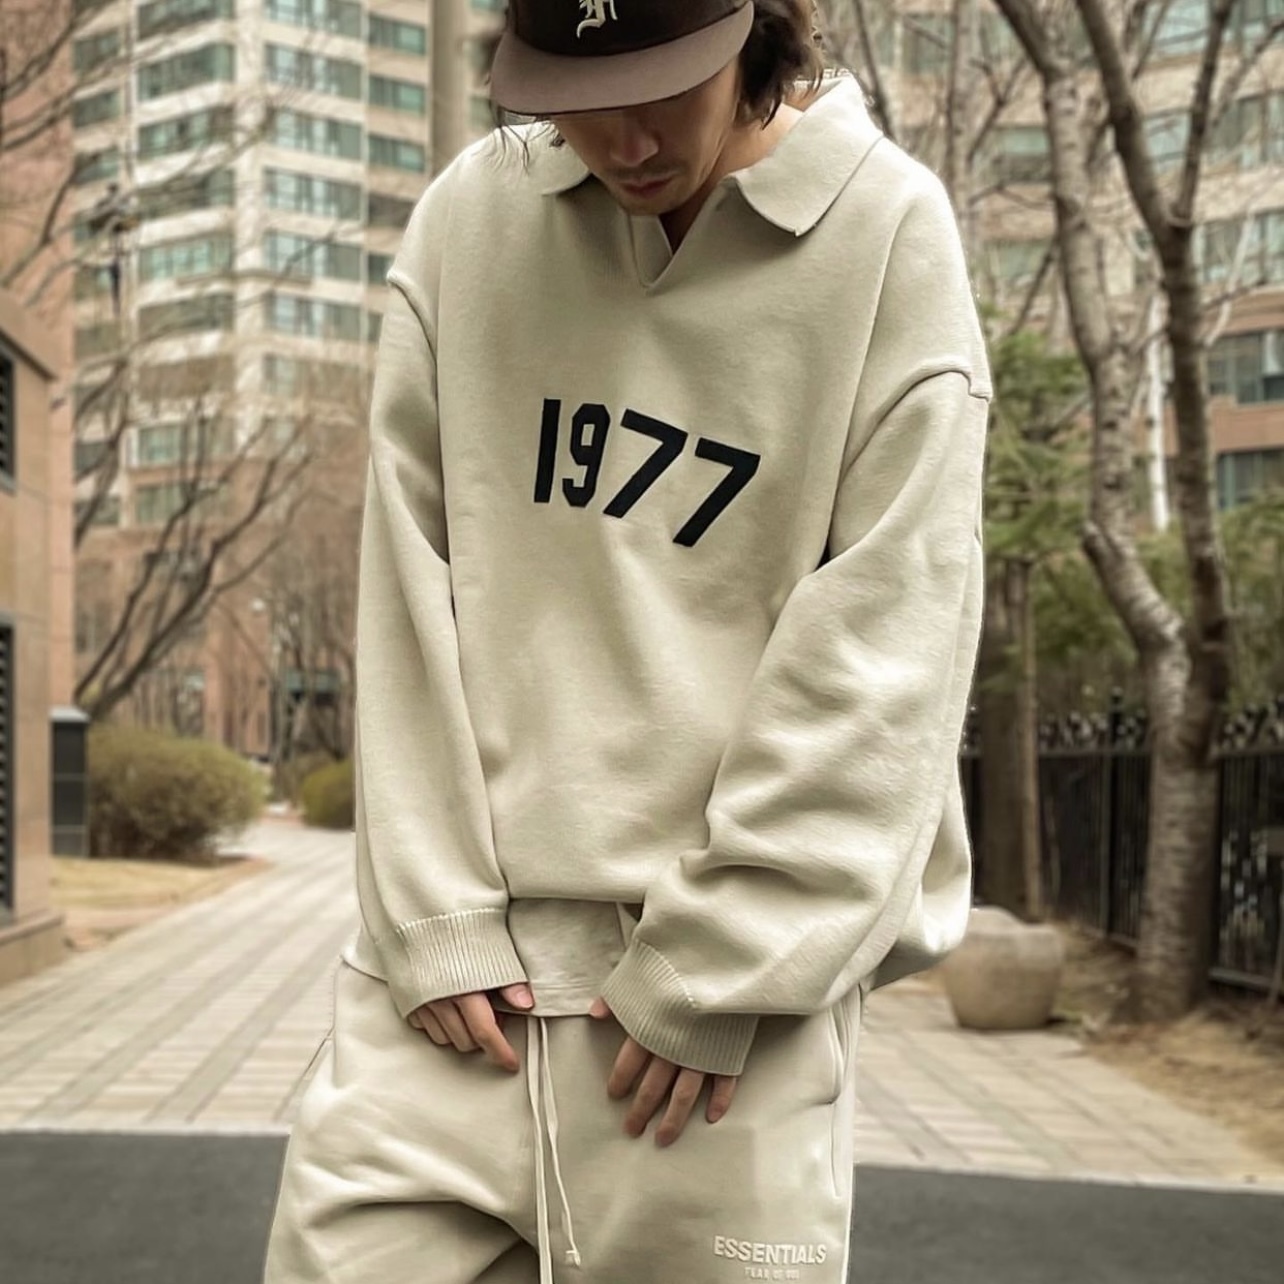 Fear of God Essentials 1977 Knit Polo - ニット